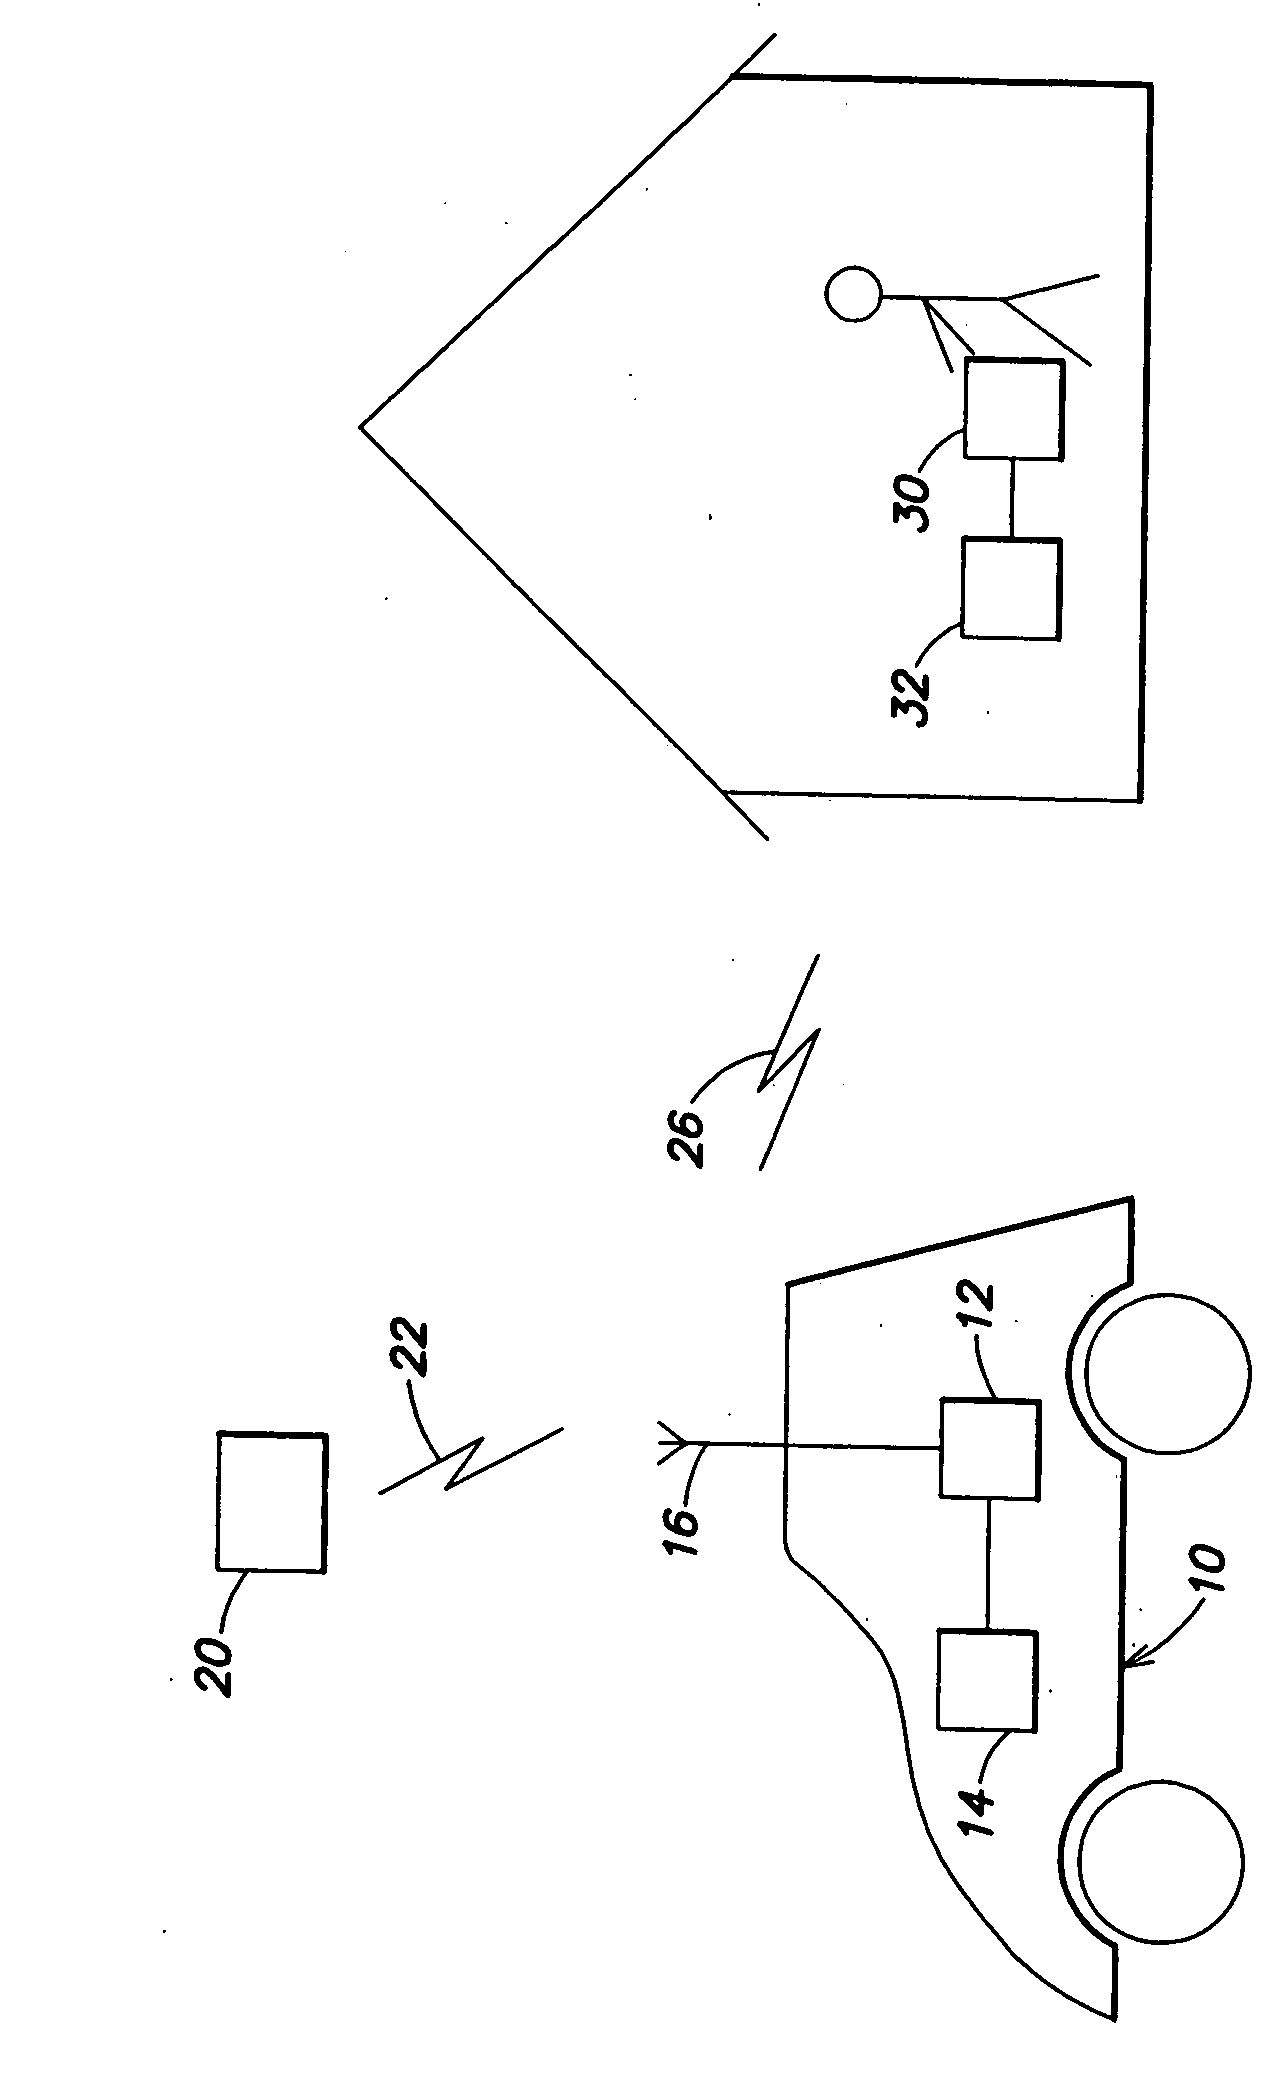 Method for operating a playback unit in a vehicle, for playing back data stored on a data medium